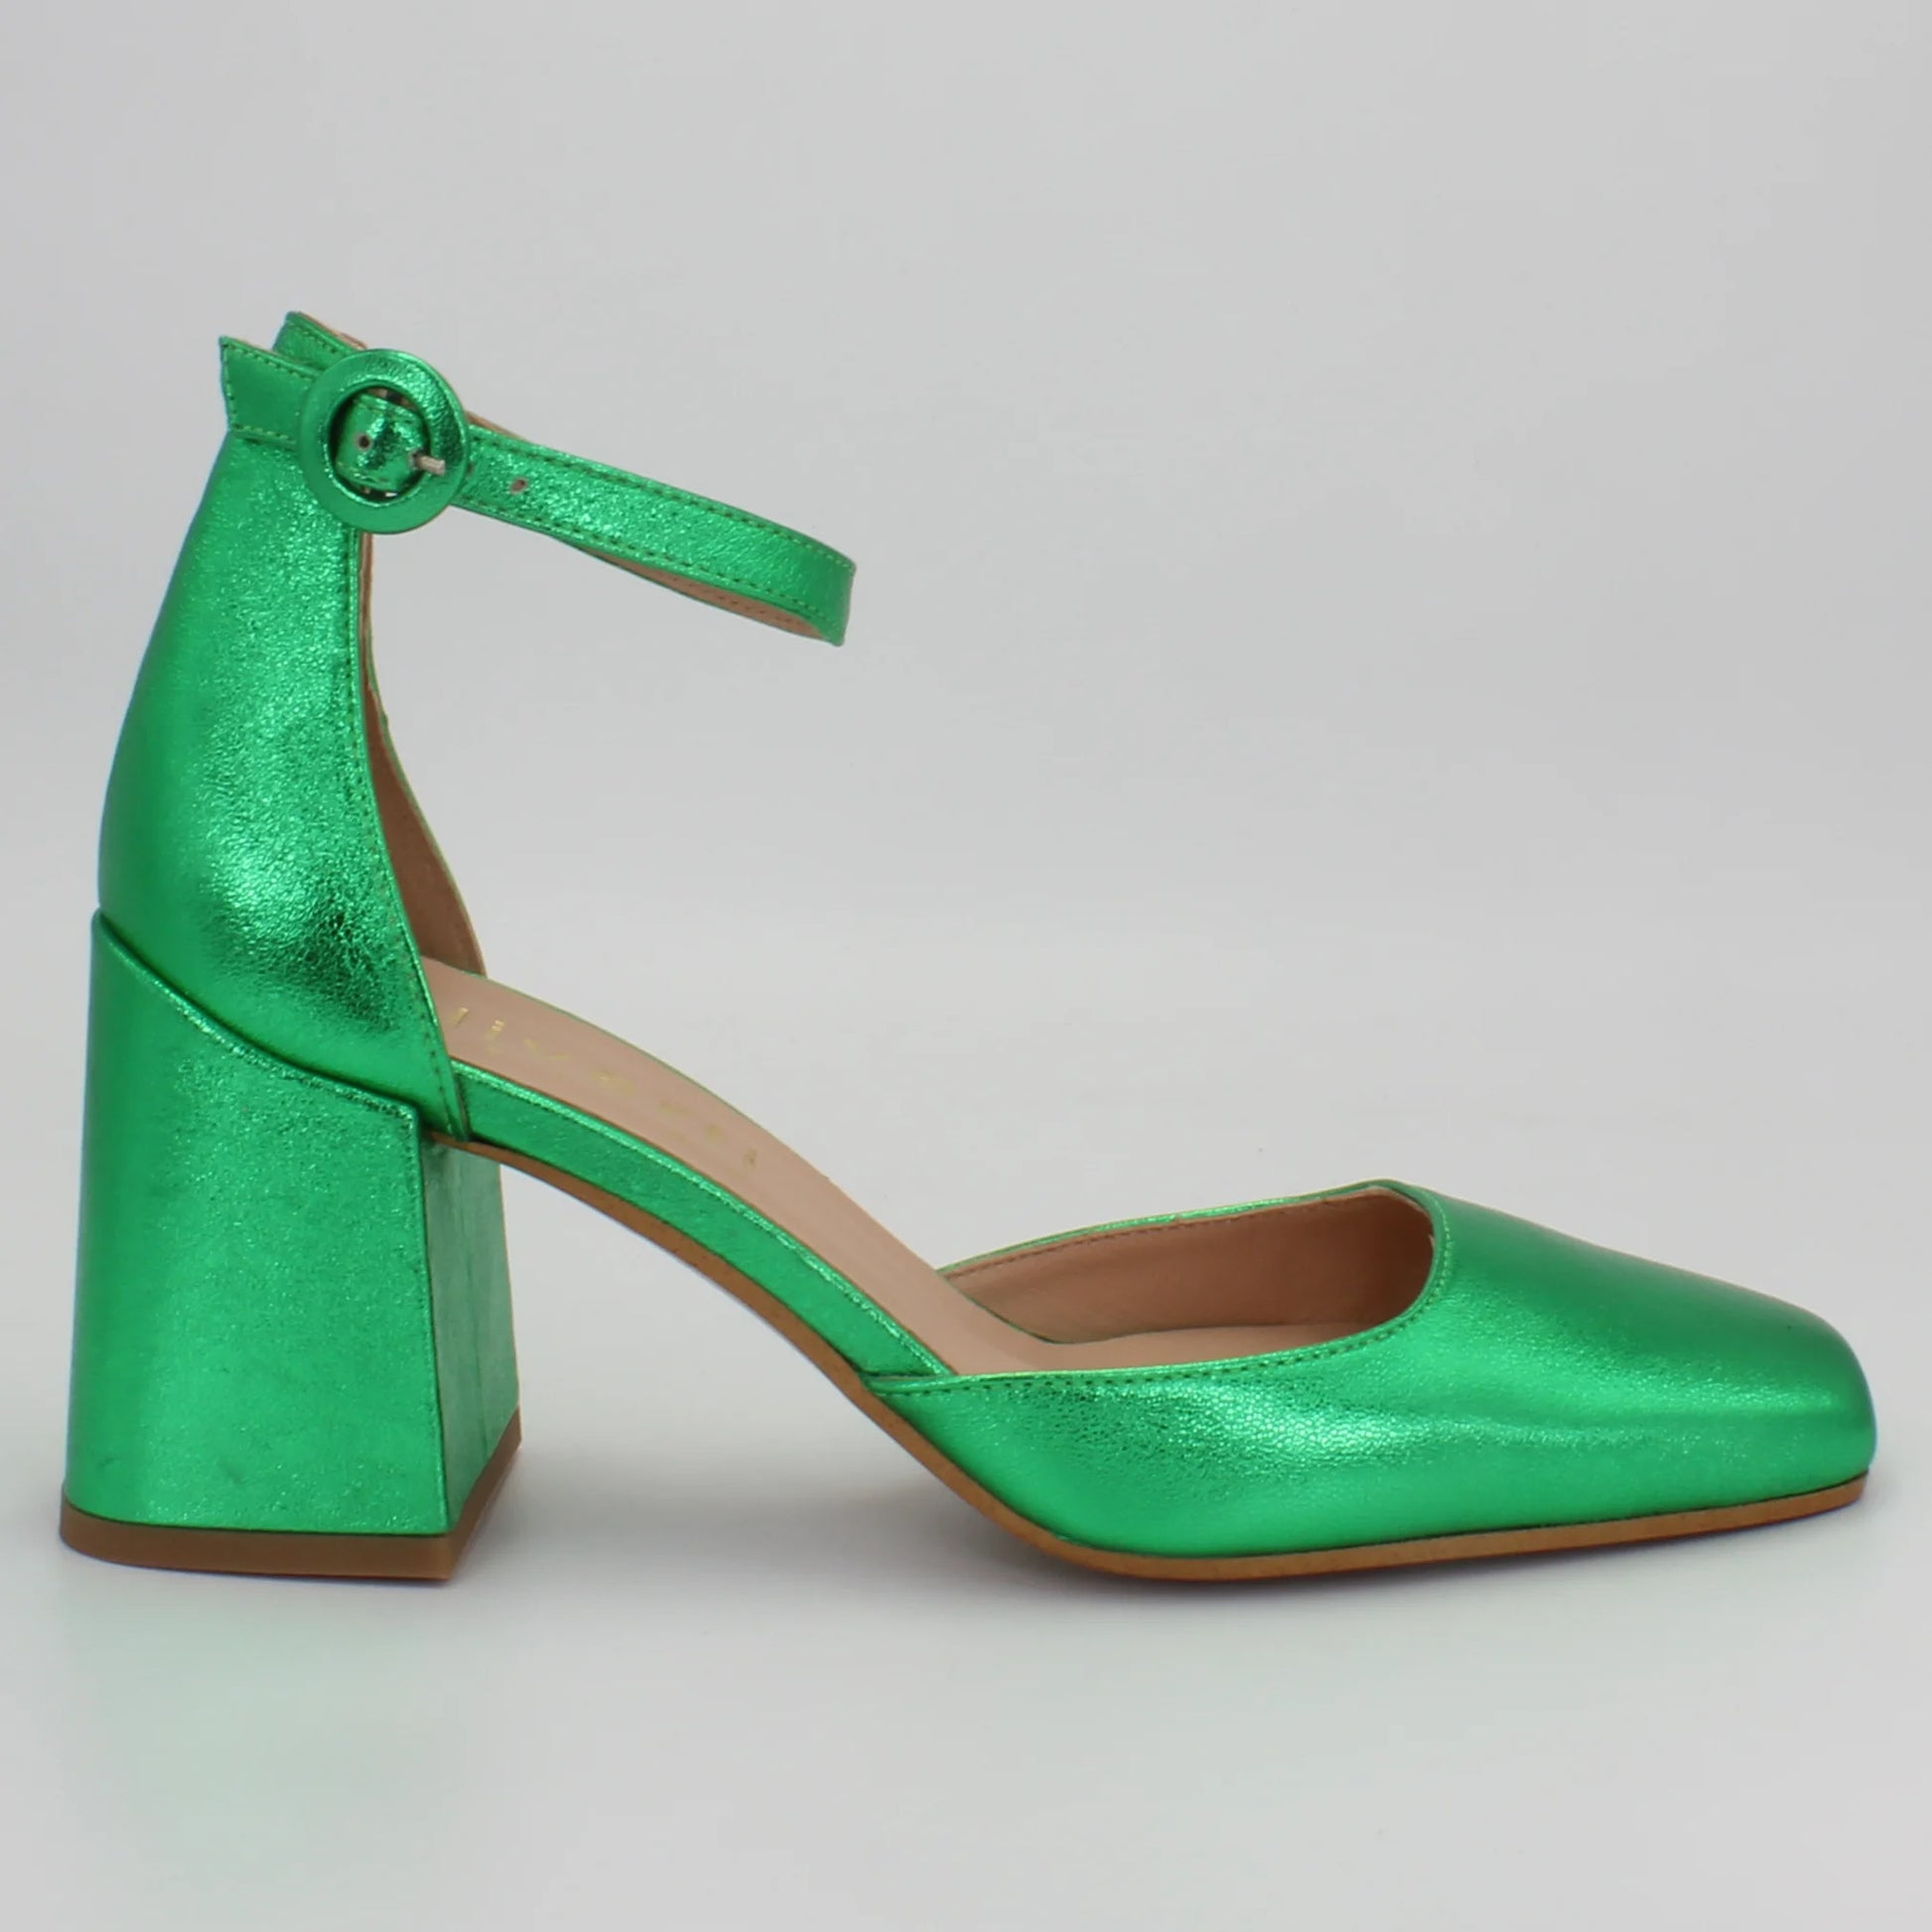 Shop Handmade Italian Leather block heel in verde laminato (SACHA7) or browse our range of hand-made Italian shoes in leather or suede in-store at Aliverti Cape Town, or shop online. We deliver in South Africa & offer multiple payment plans as well as accept multiple safe & secure payment methods.